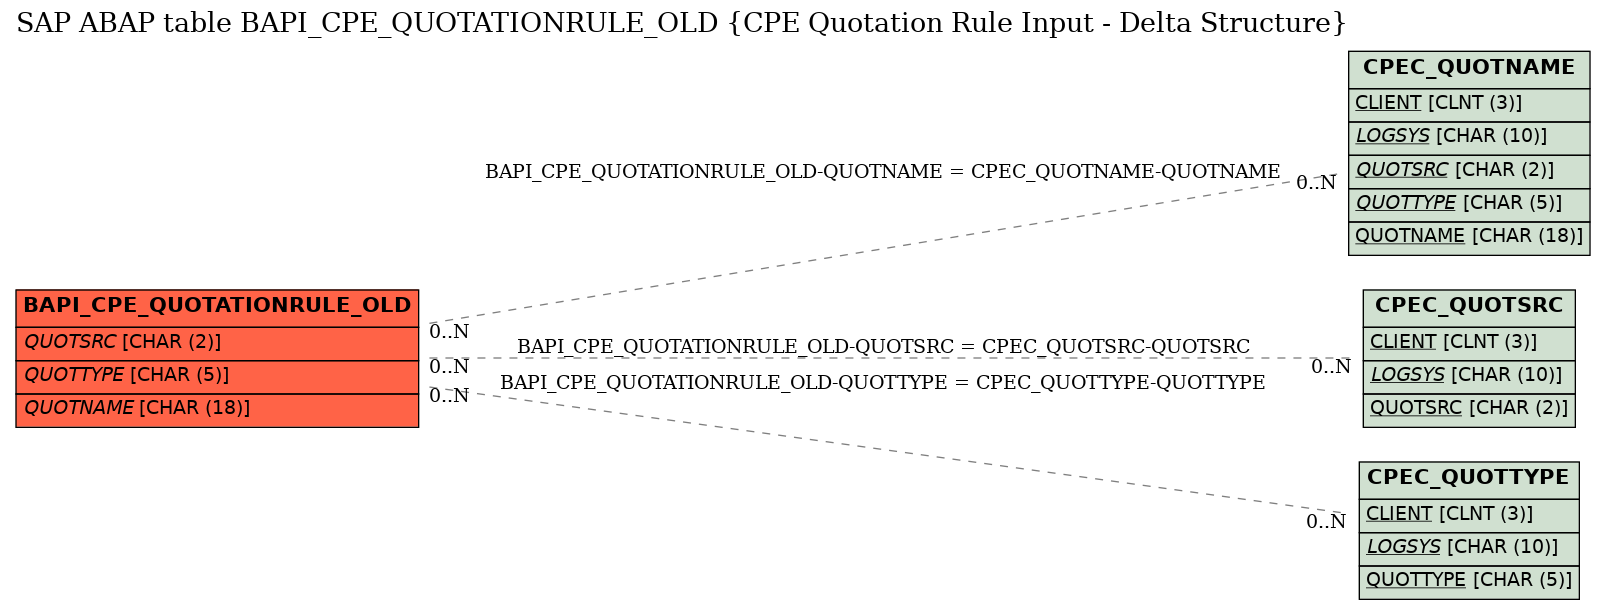 E-R Diagram for table BAPI_CPE_QUOTATIONRULE_OLD (CPE Quotation Rule Input - Delta Structure)